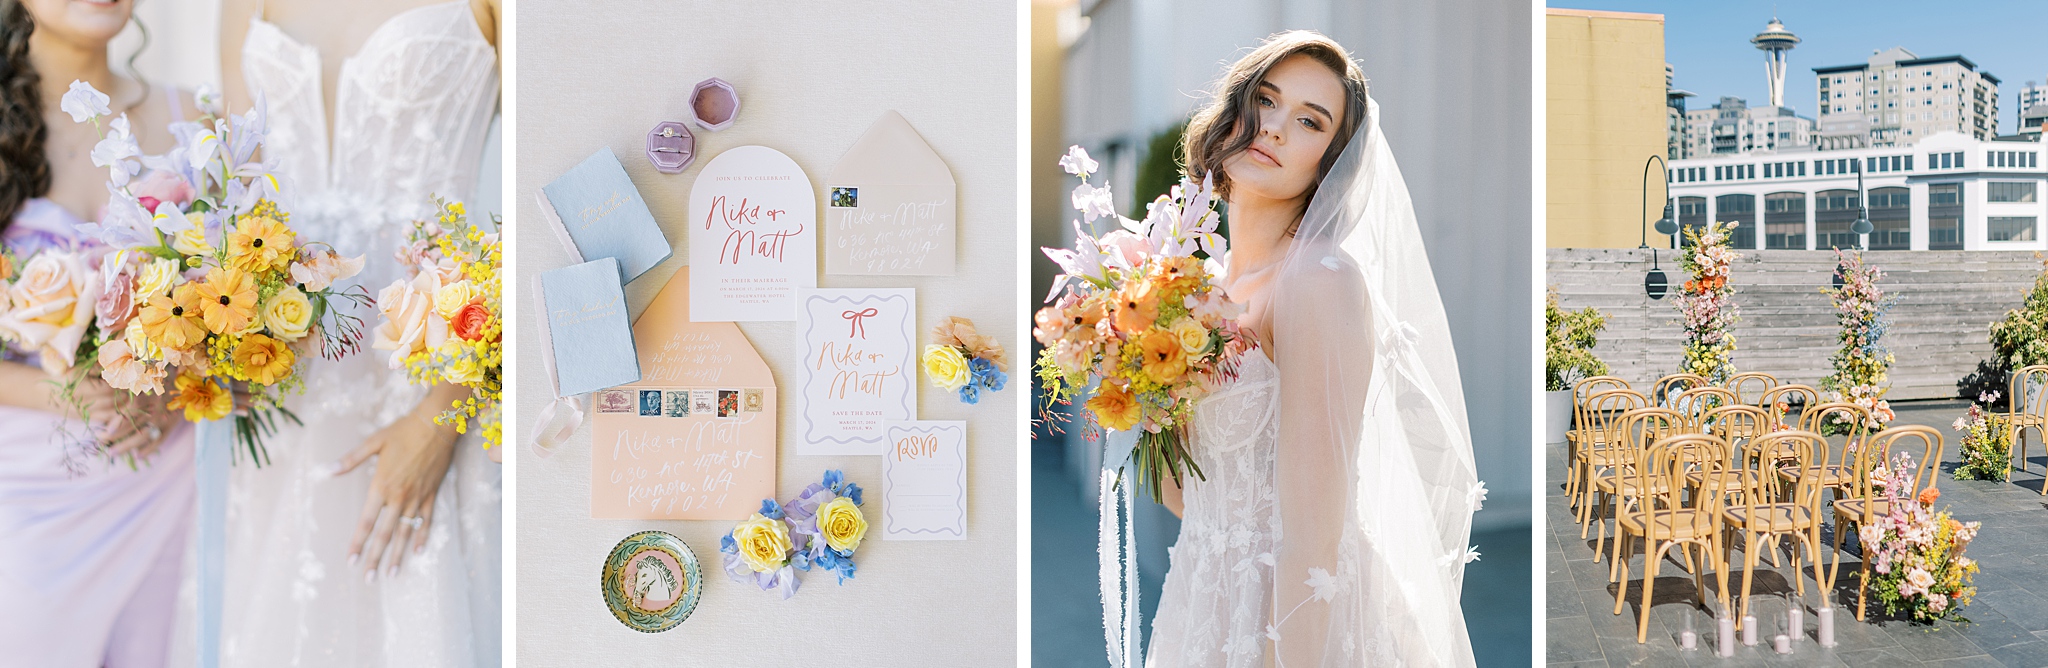 Four images from a colorful pastel photoshoot at Edgewater Hotel featuring a bouquet, invitations, a bride, and a ceremony space facing the Seattle skyline